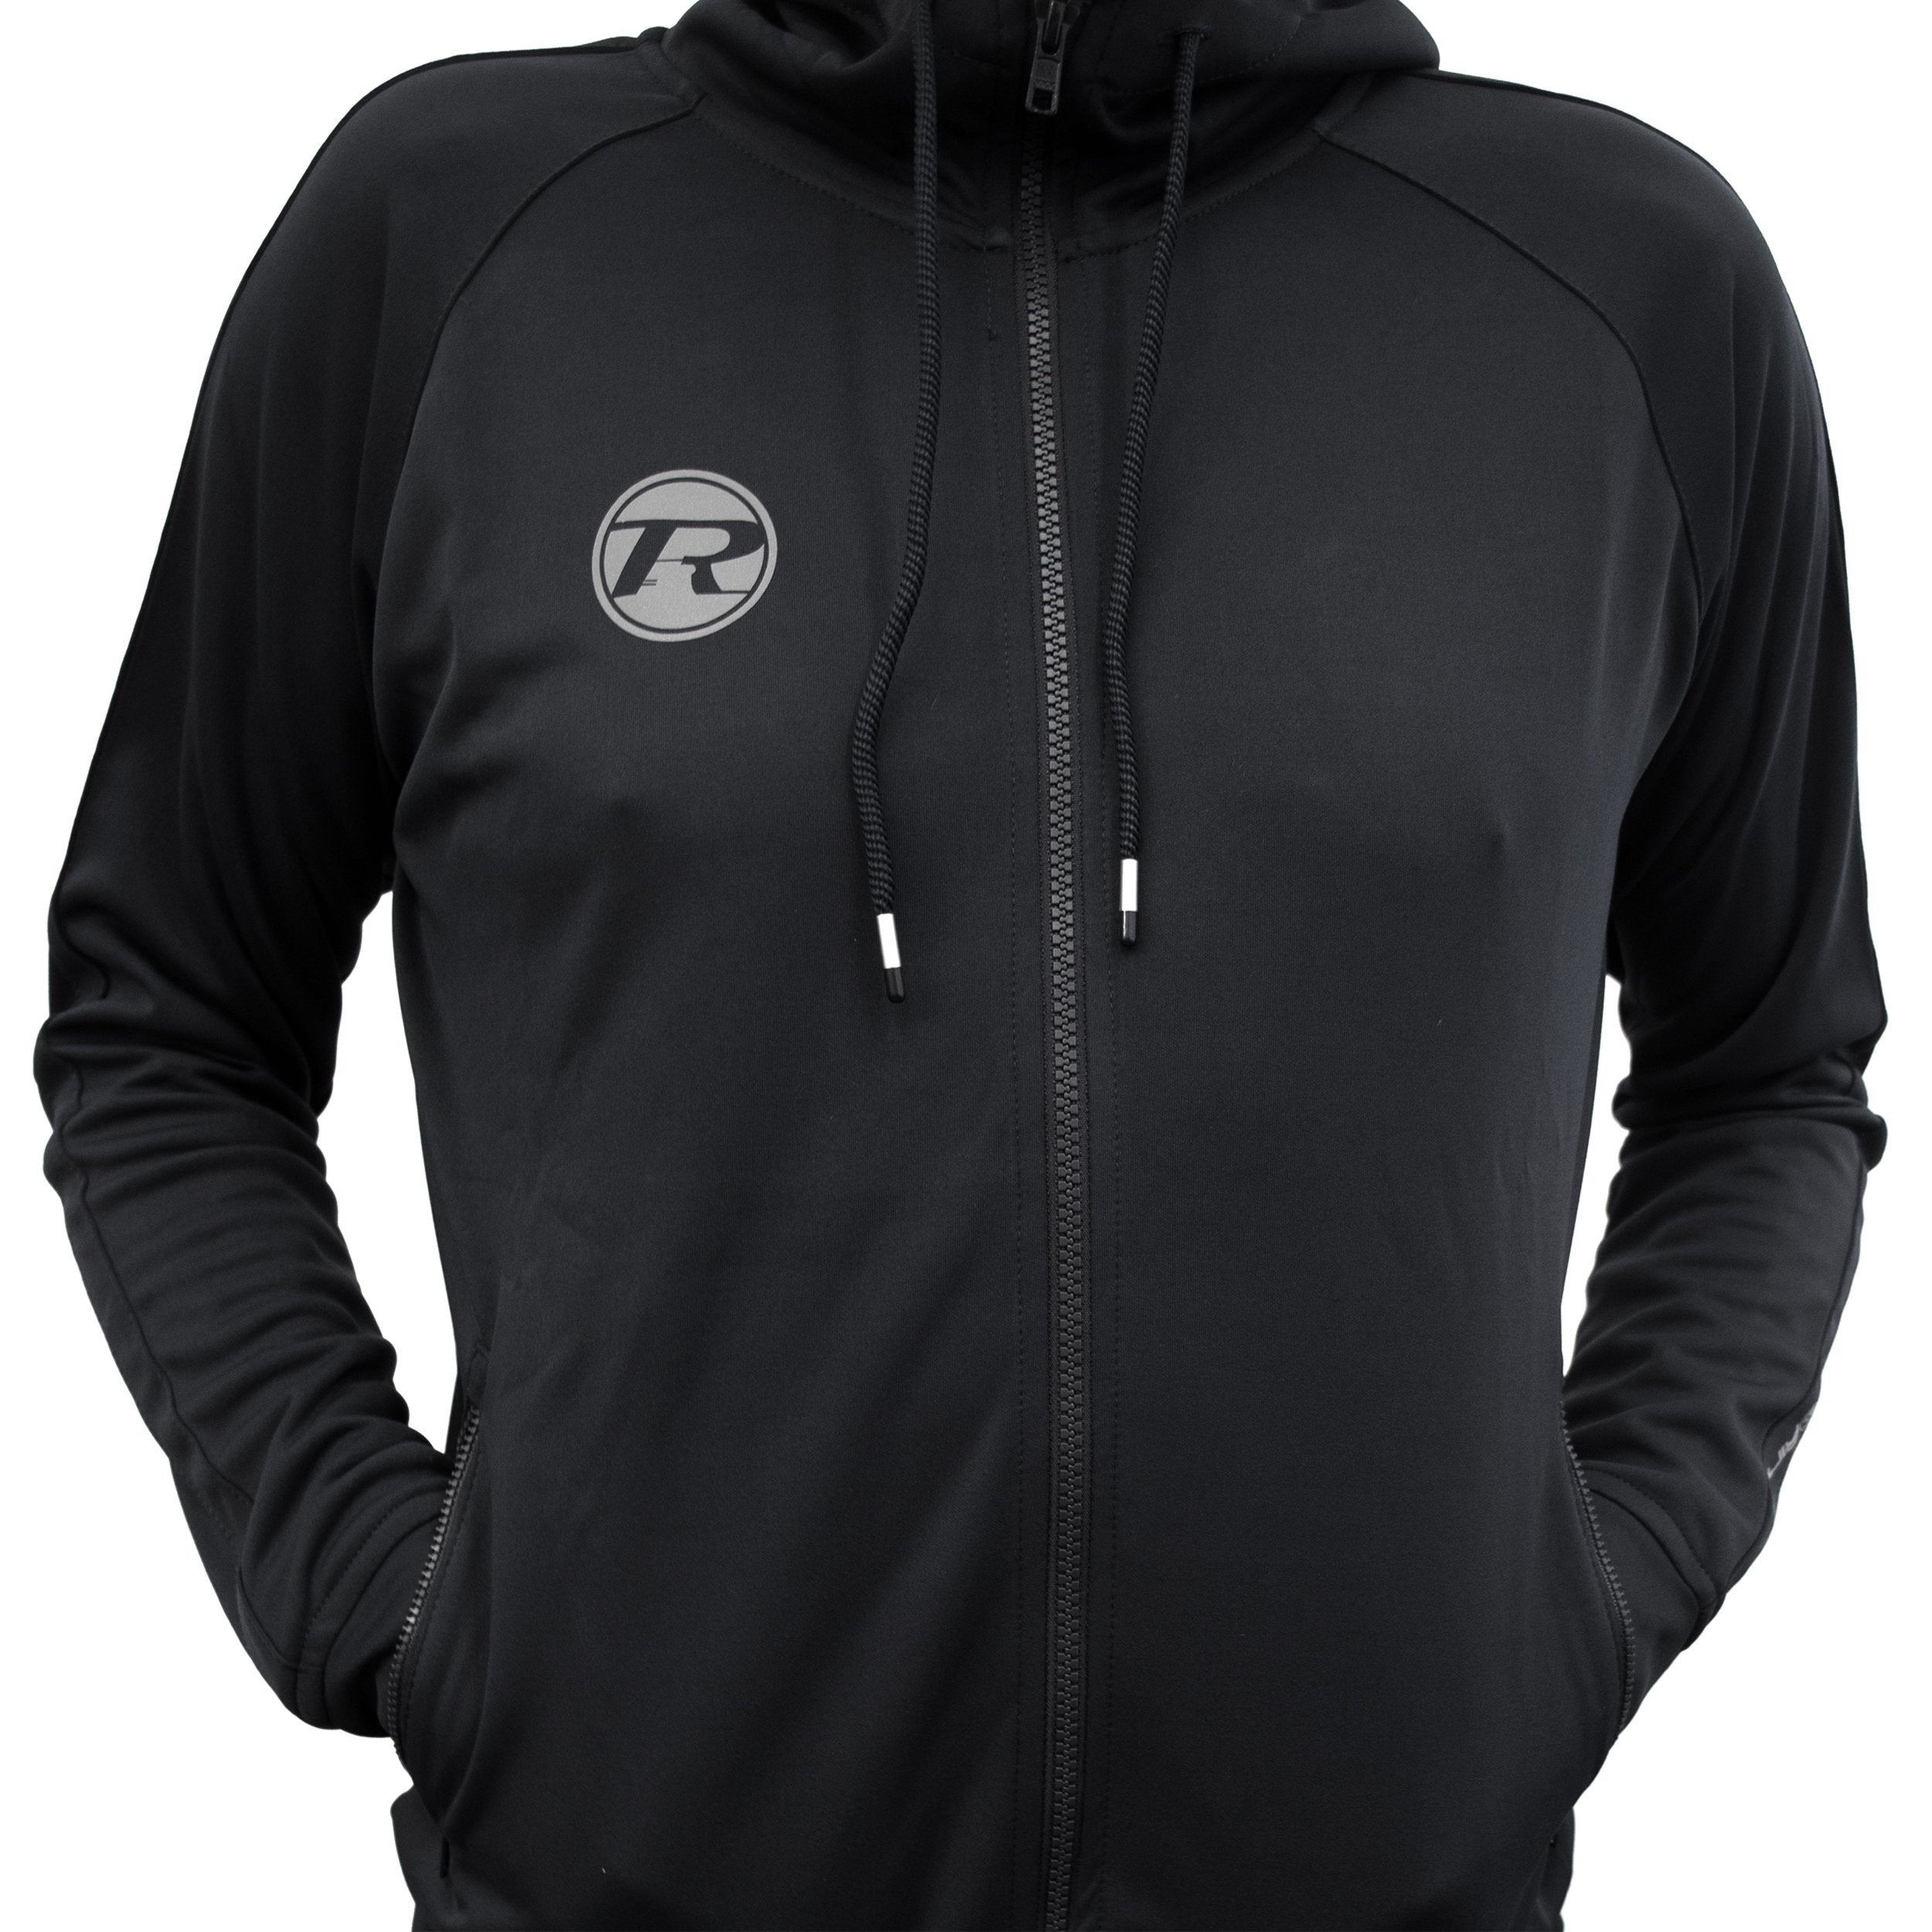 Pro Apparel Hooded Tracksuit Black / Silver